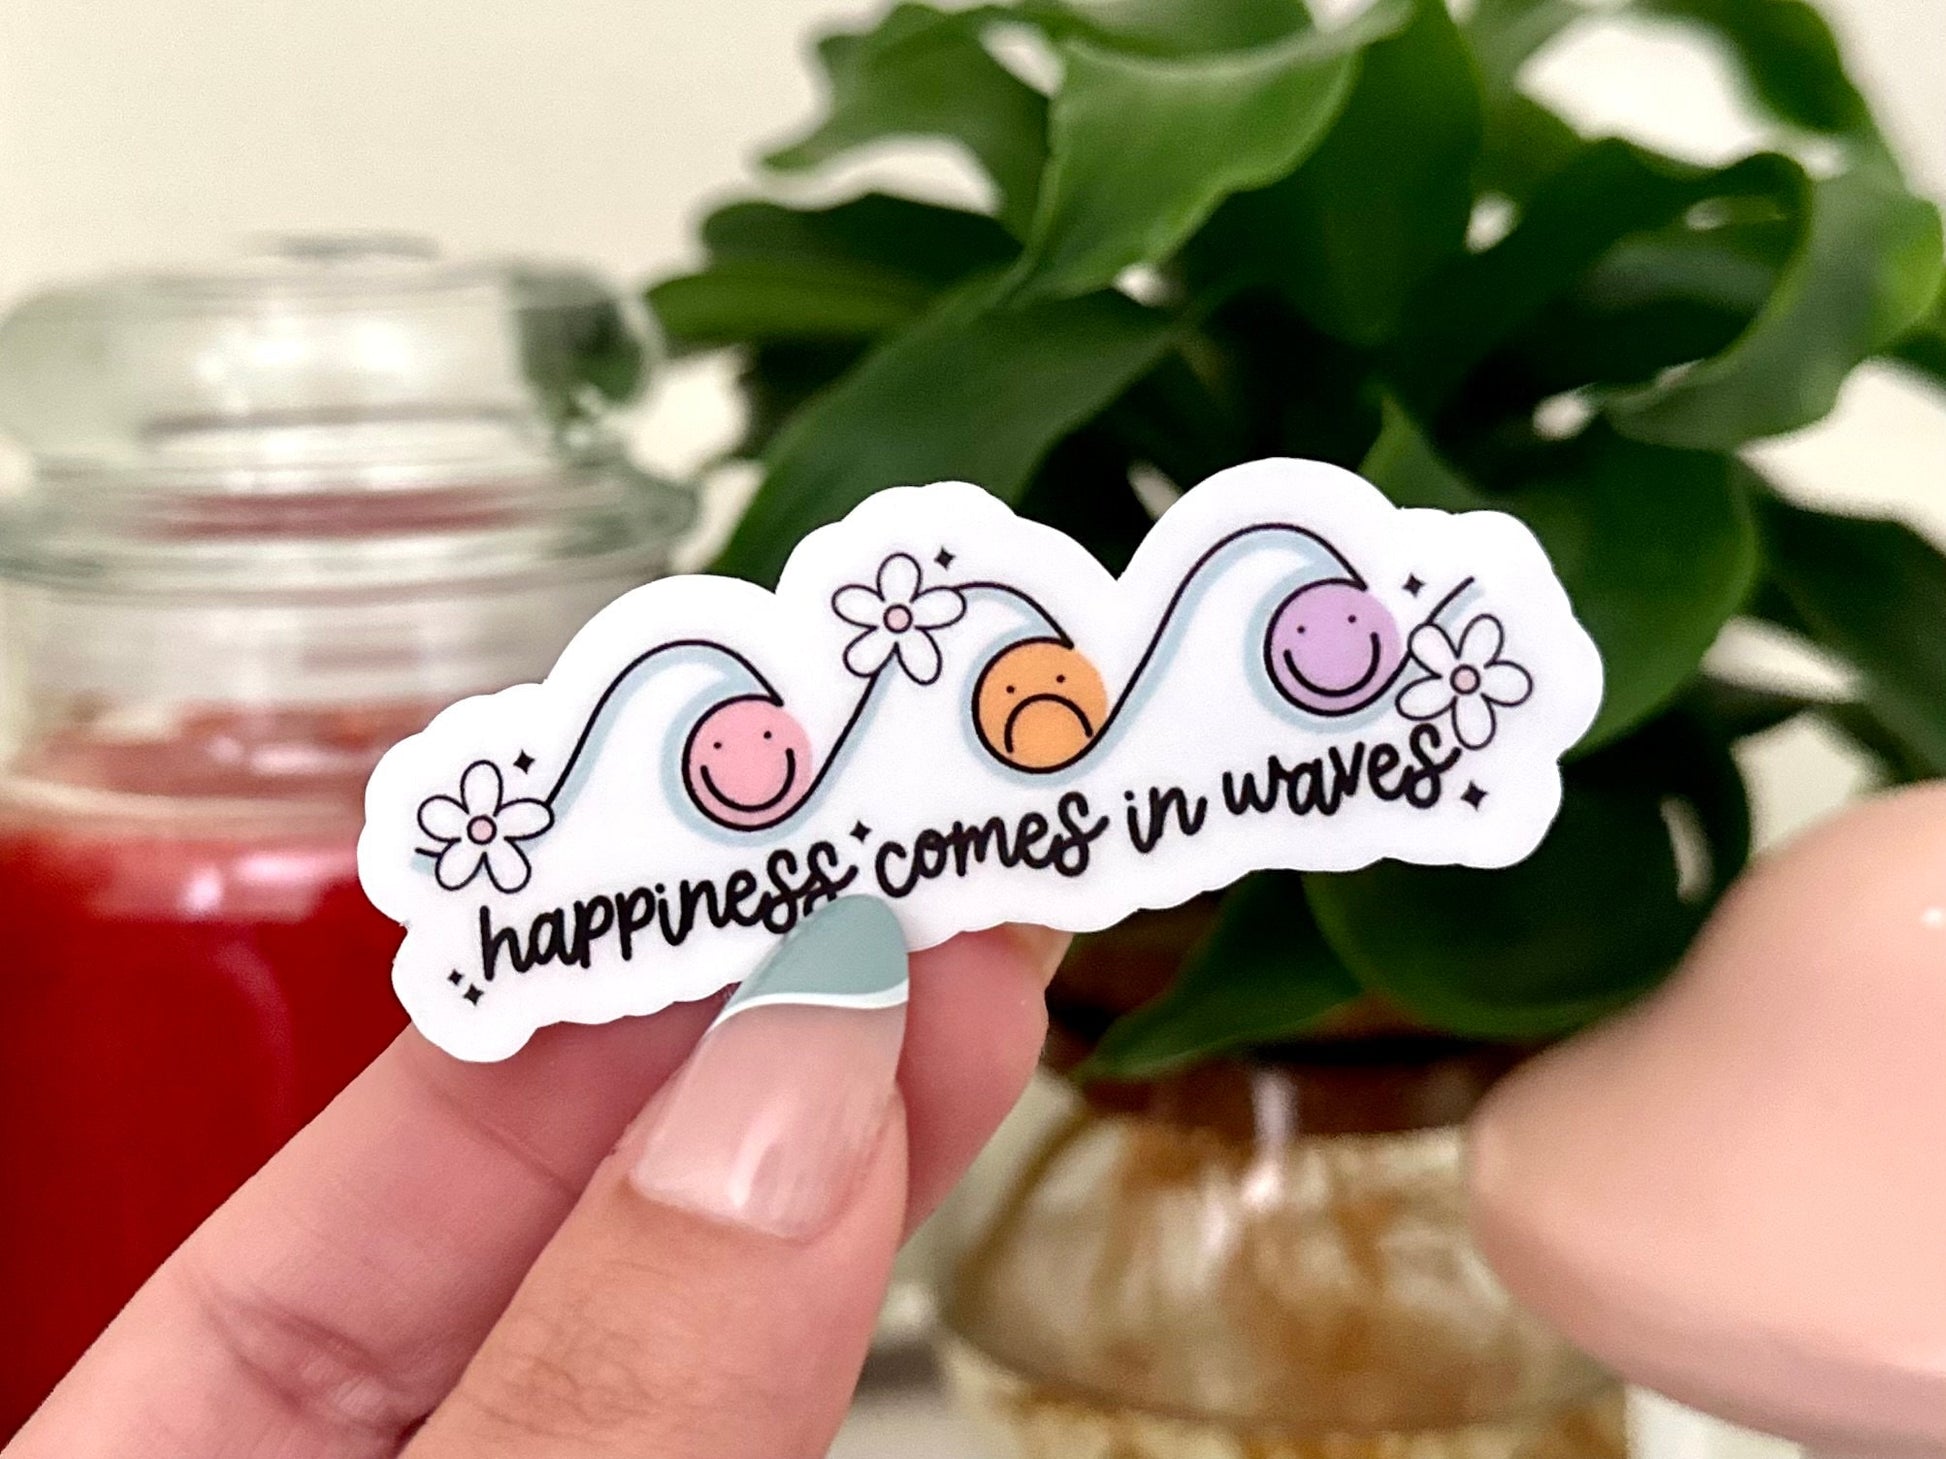 Happiness Comes in Waves Waterproof Sticker, Positivity Stickers, Inspiring Decals, Tumbler Stickers, Waterbottle Stickers